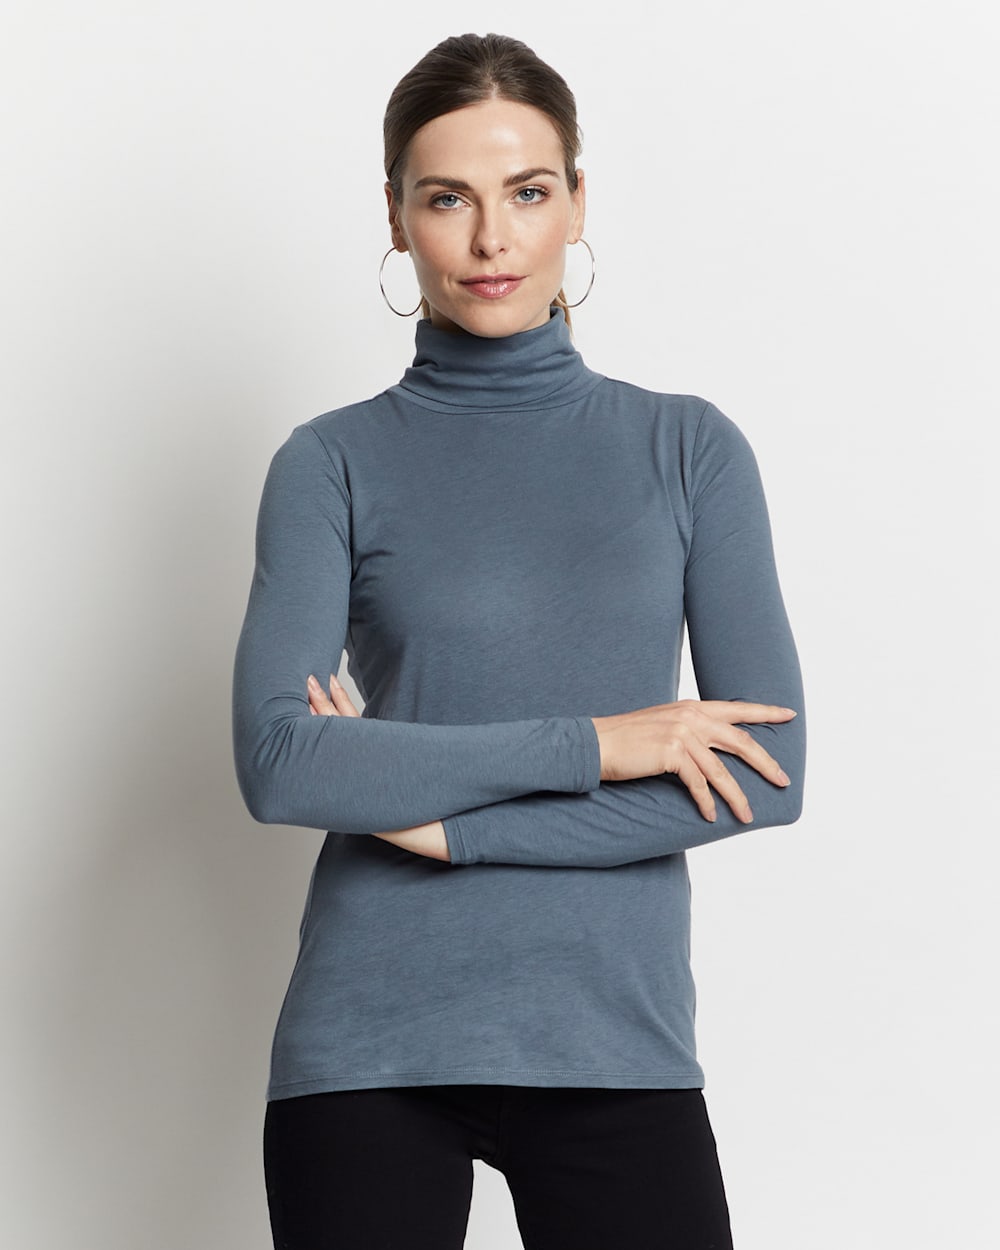 LONG-SLEEVE TURTLENECK JERSEY TEE IN STORMY BLUE image number 1